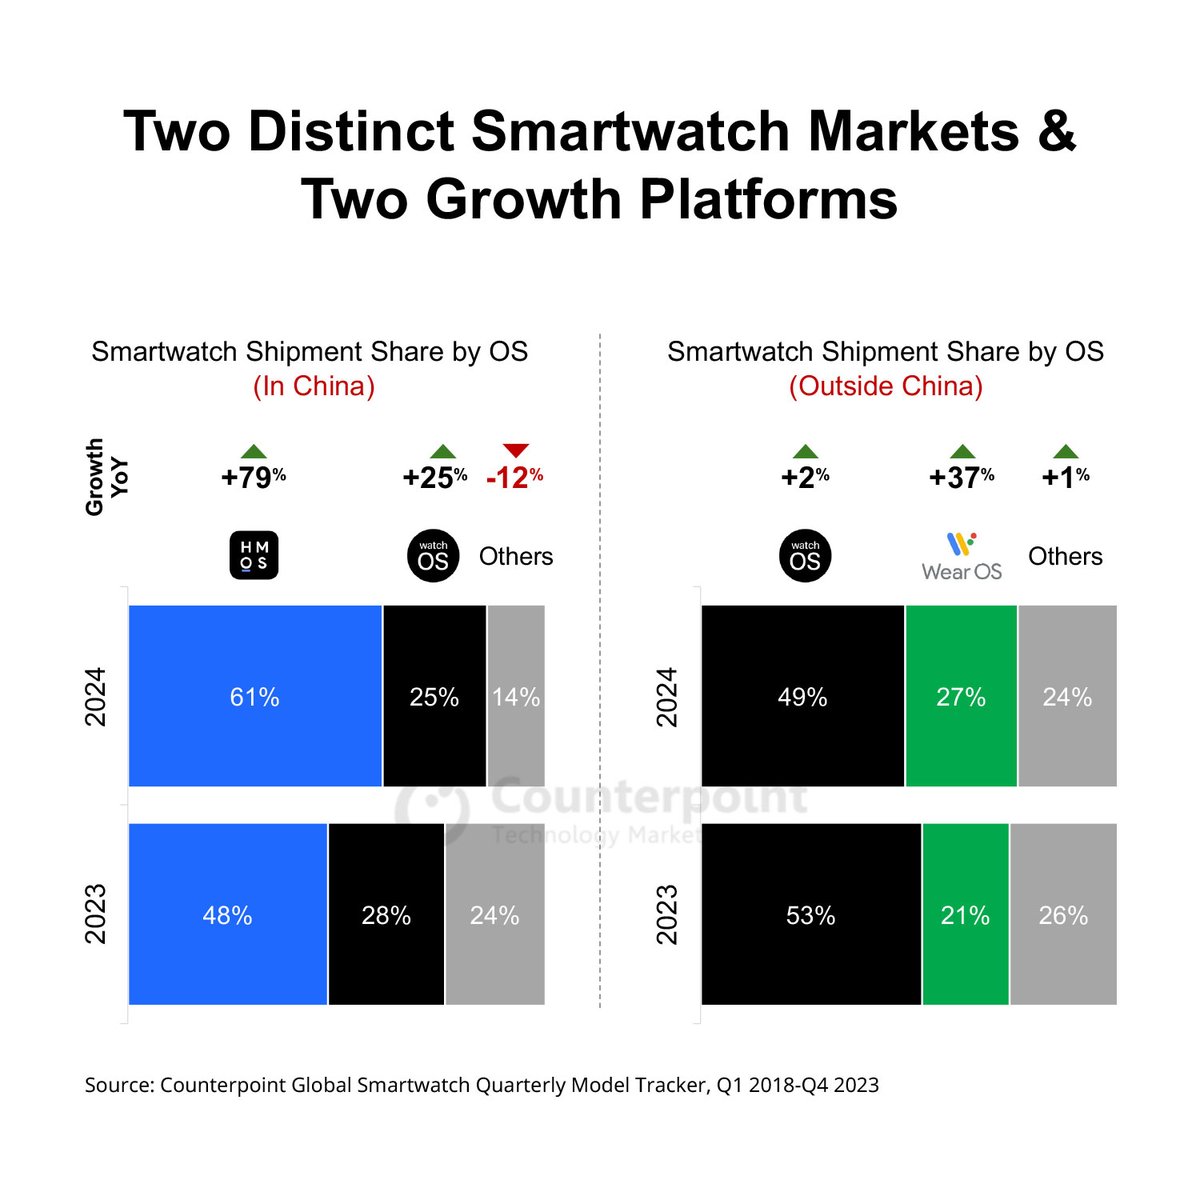 Just published: Wear OS, HarmonyOS to Register Strong Growth in Global Smartwatch Market in 2024 Key takeaways: - Global HLOS smartwatch market to grow by 15% annually. - While @Apple #WatchOS dominates, HarmonyOS and Google Wear OS sees growing adoption. - #HarmonyOS